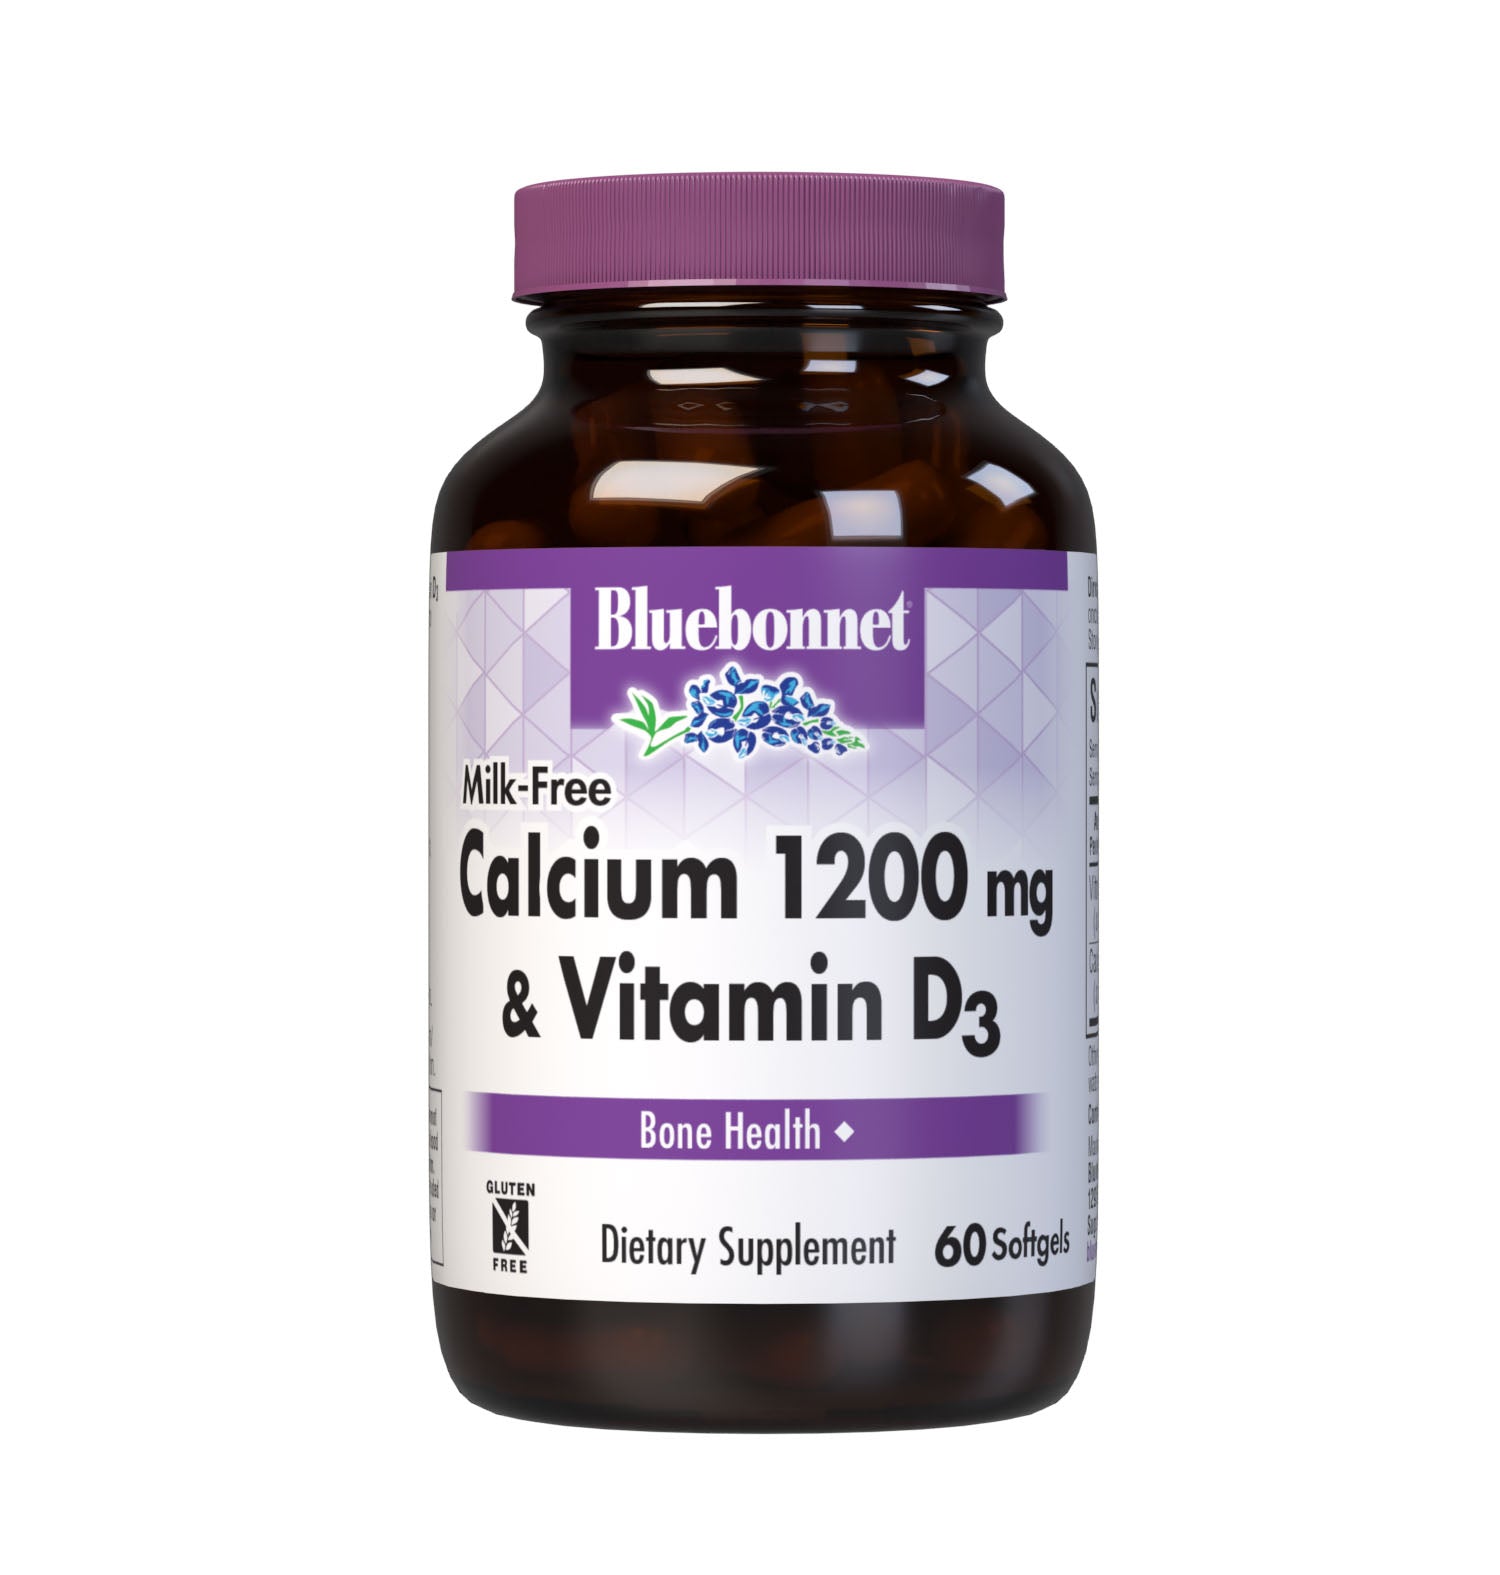 Bluebonnet’s Milk-Free Calcium 1200 mg & Vitamin D3 60 Softgels are formulated with a combination of calcium carbonate and vitamin D3 (cholecalciferol) from lanolin for strong, healthy bones.  #size_60 count